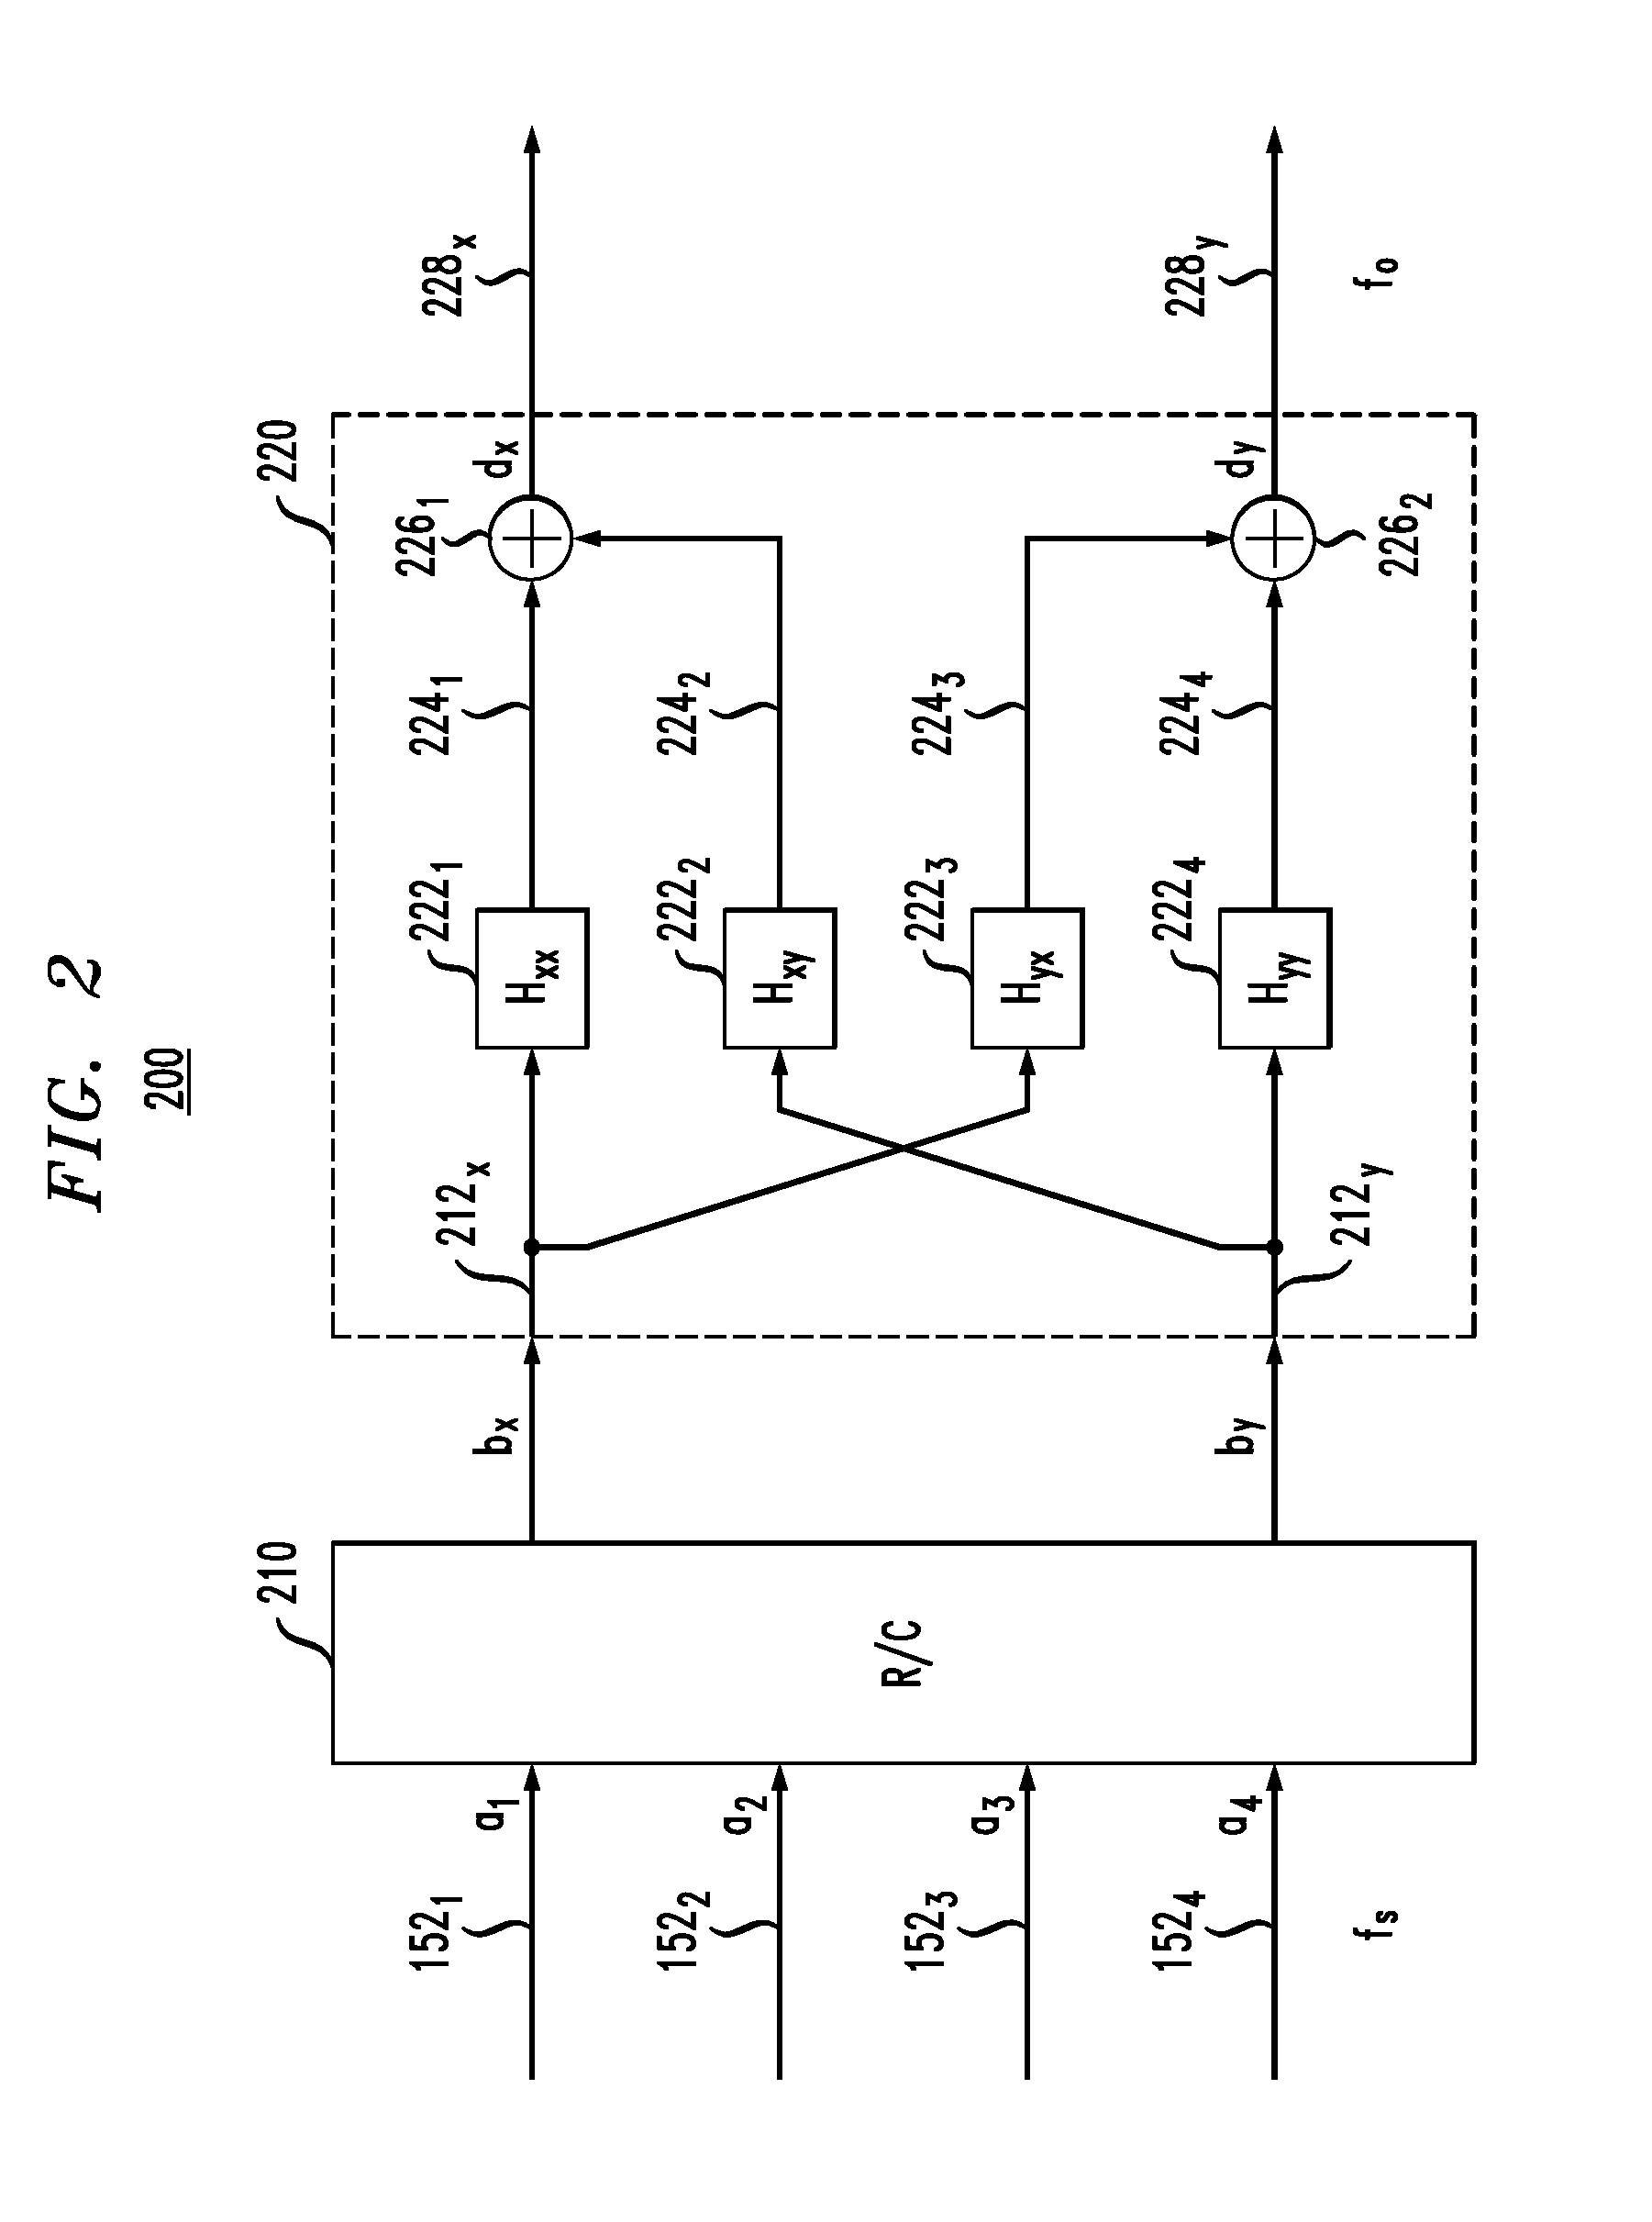 Optical receiver having an equalization filter with an integrated signal re-sampler